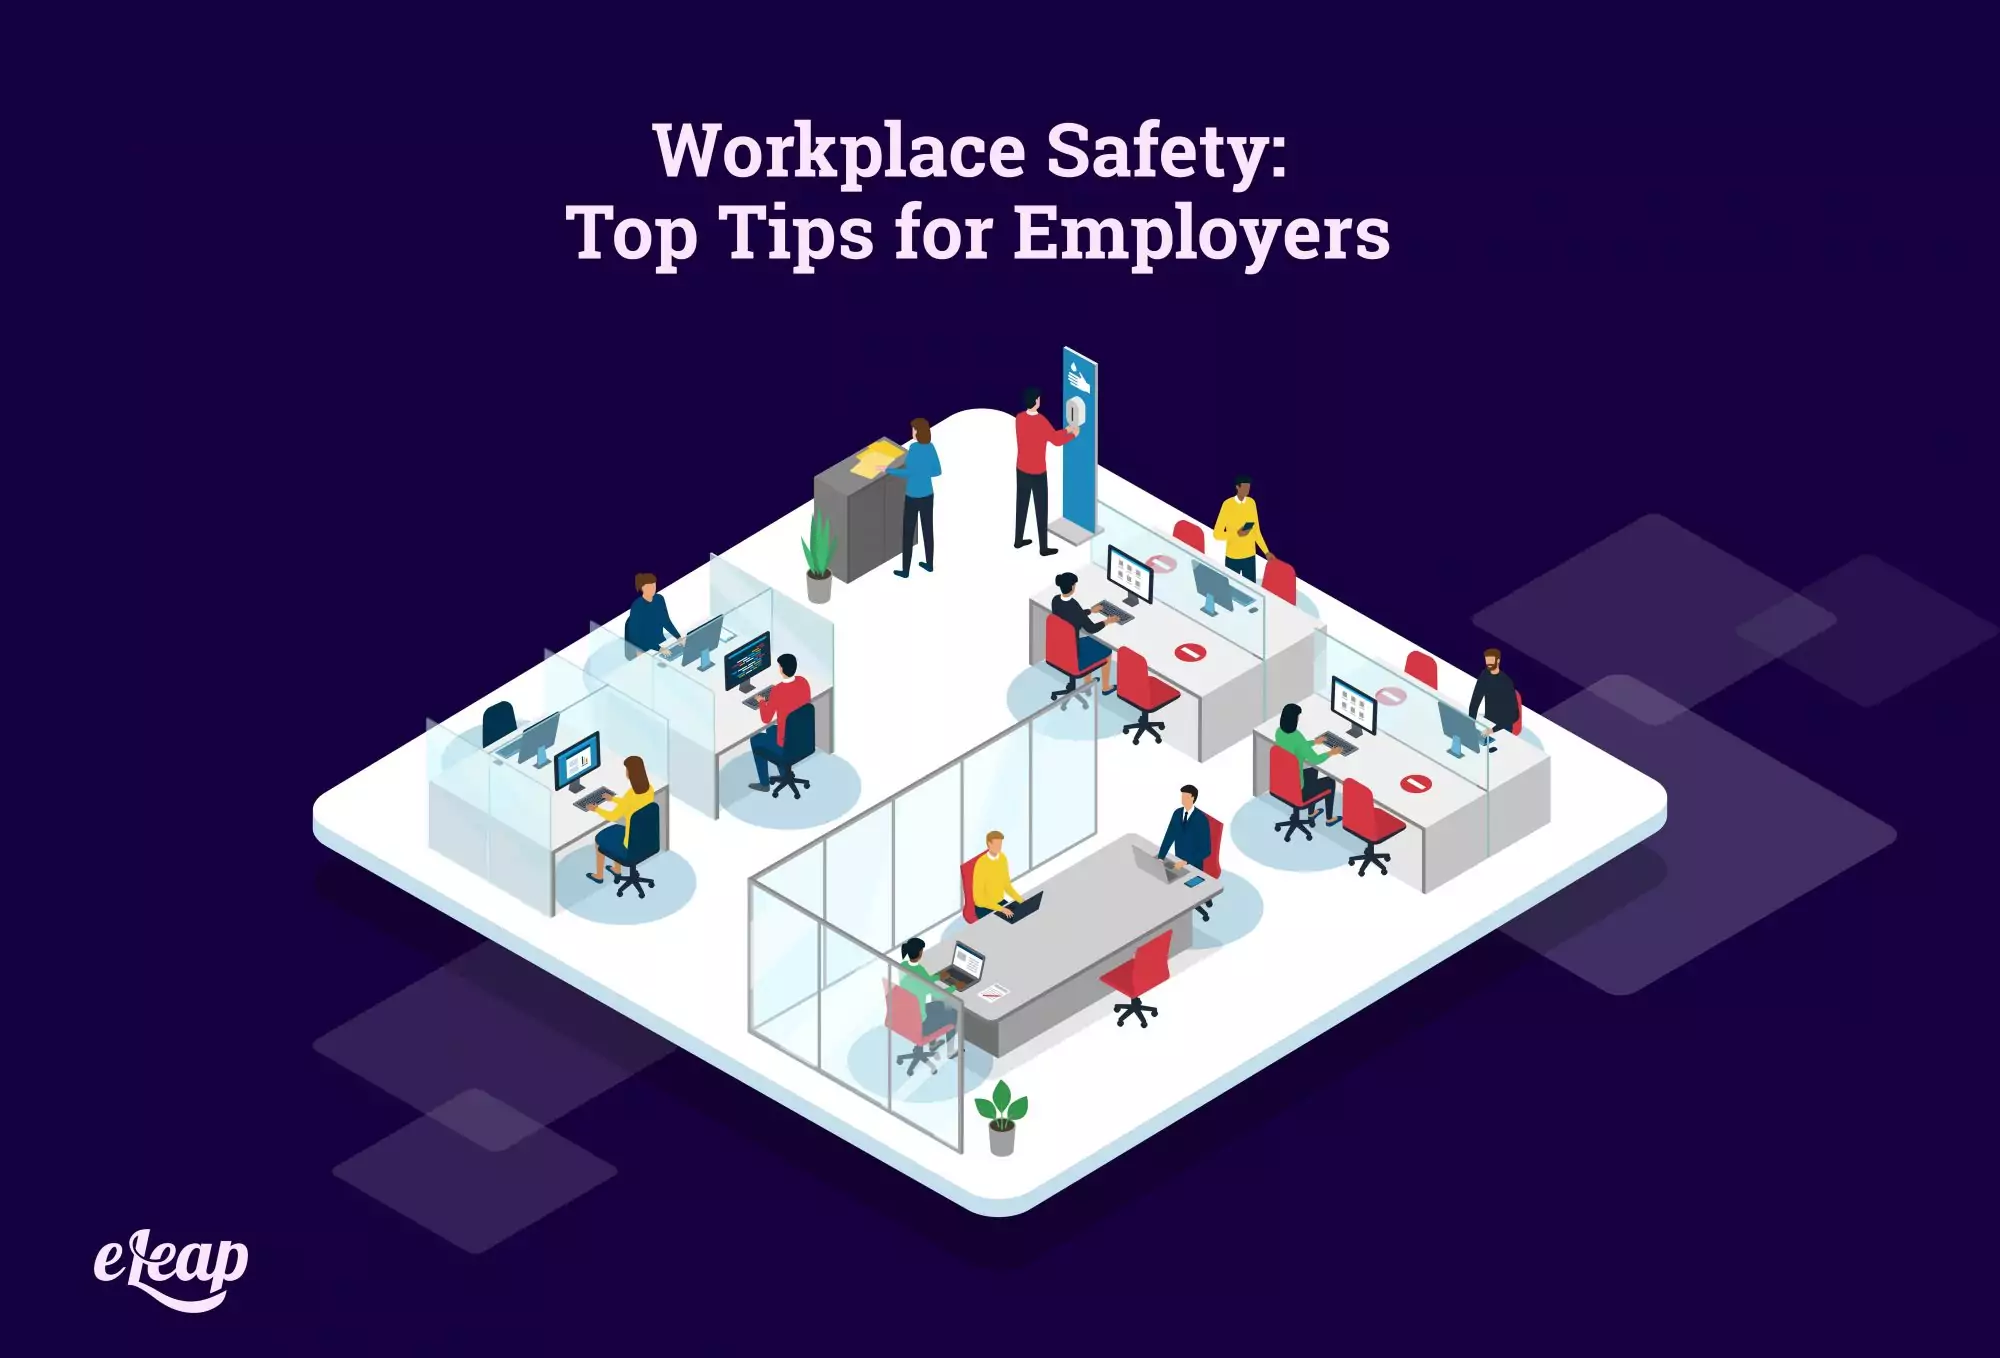 Workplace Safety: Top Tips for Employers